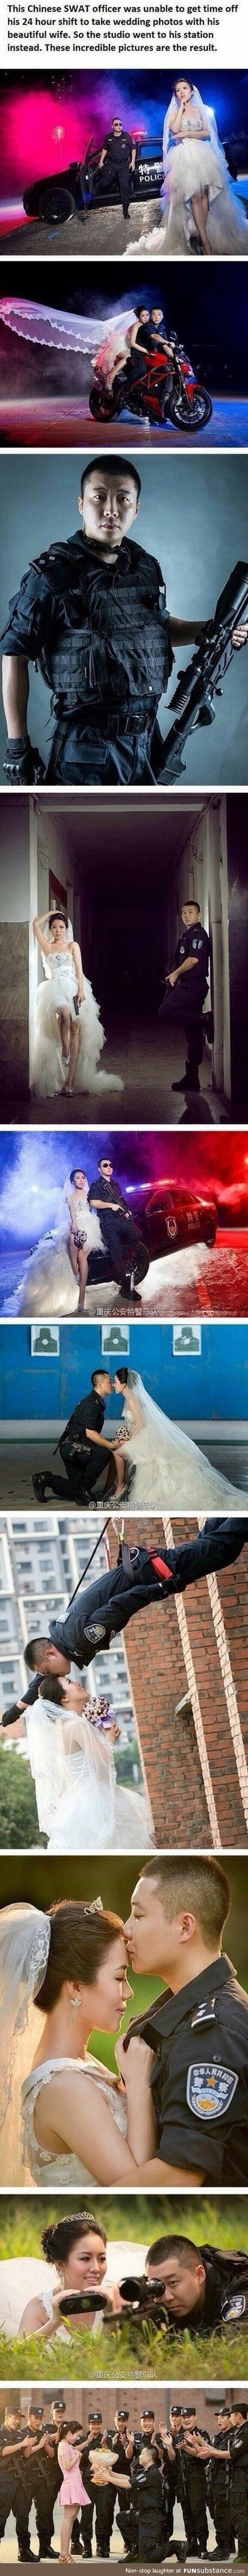 Cop wedding photo while on duty